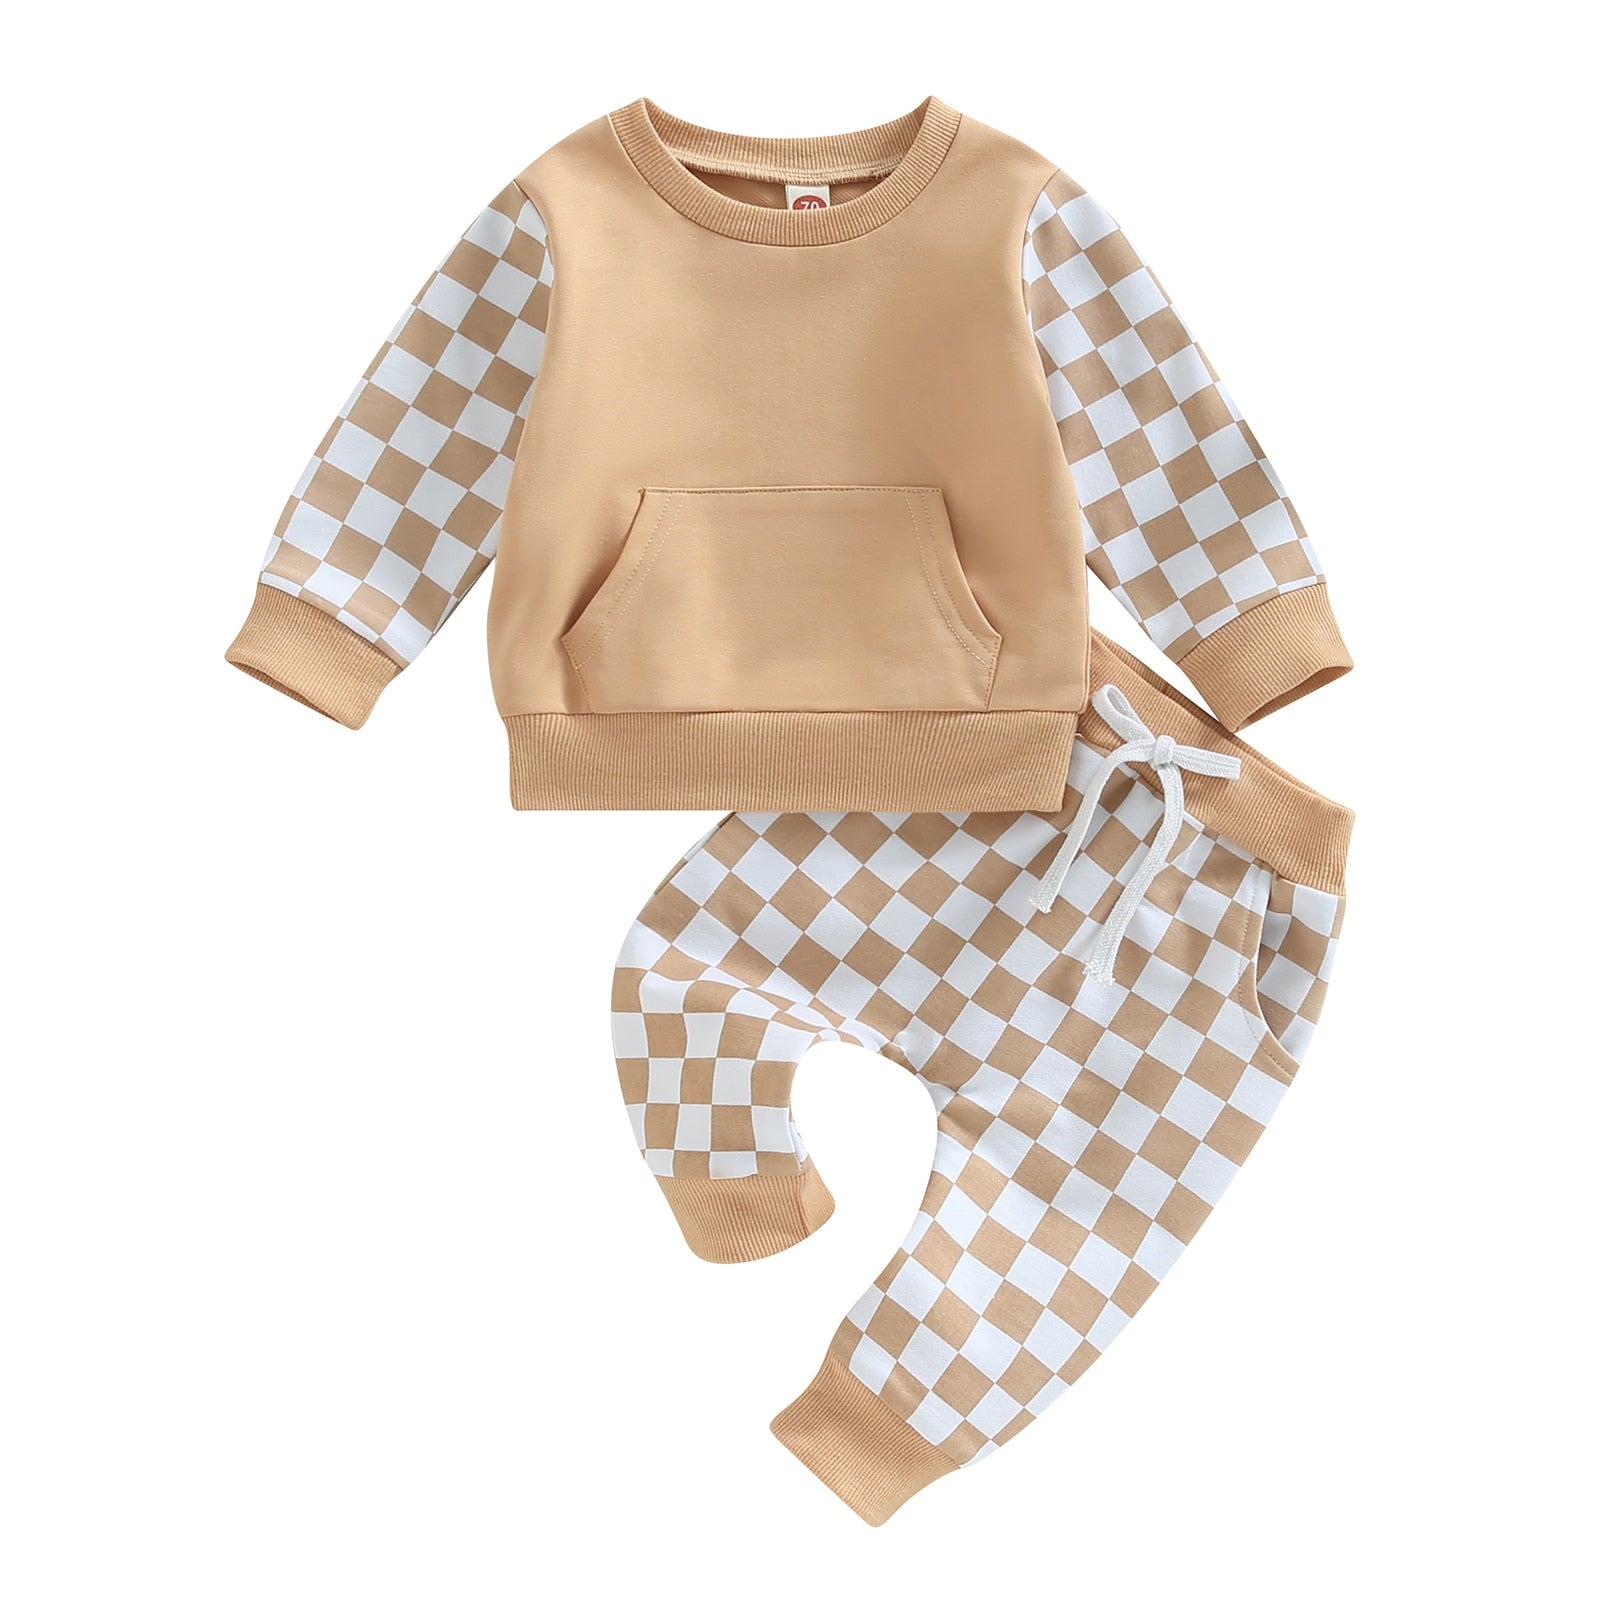 Adorable Spring Kid Clothes Set with Cow Head Print and Long Sleeve Sweatshirt